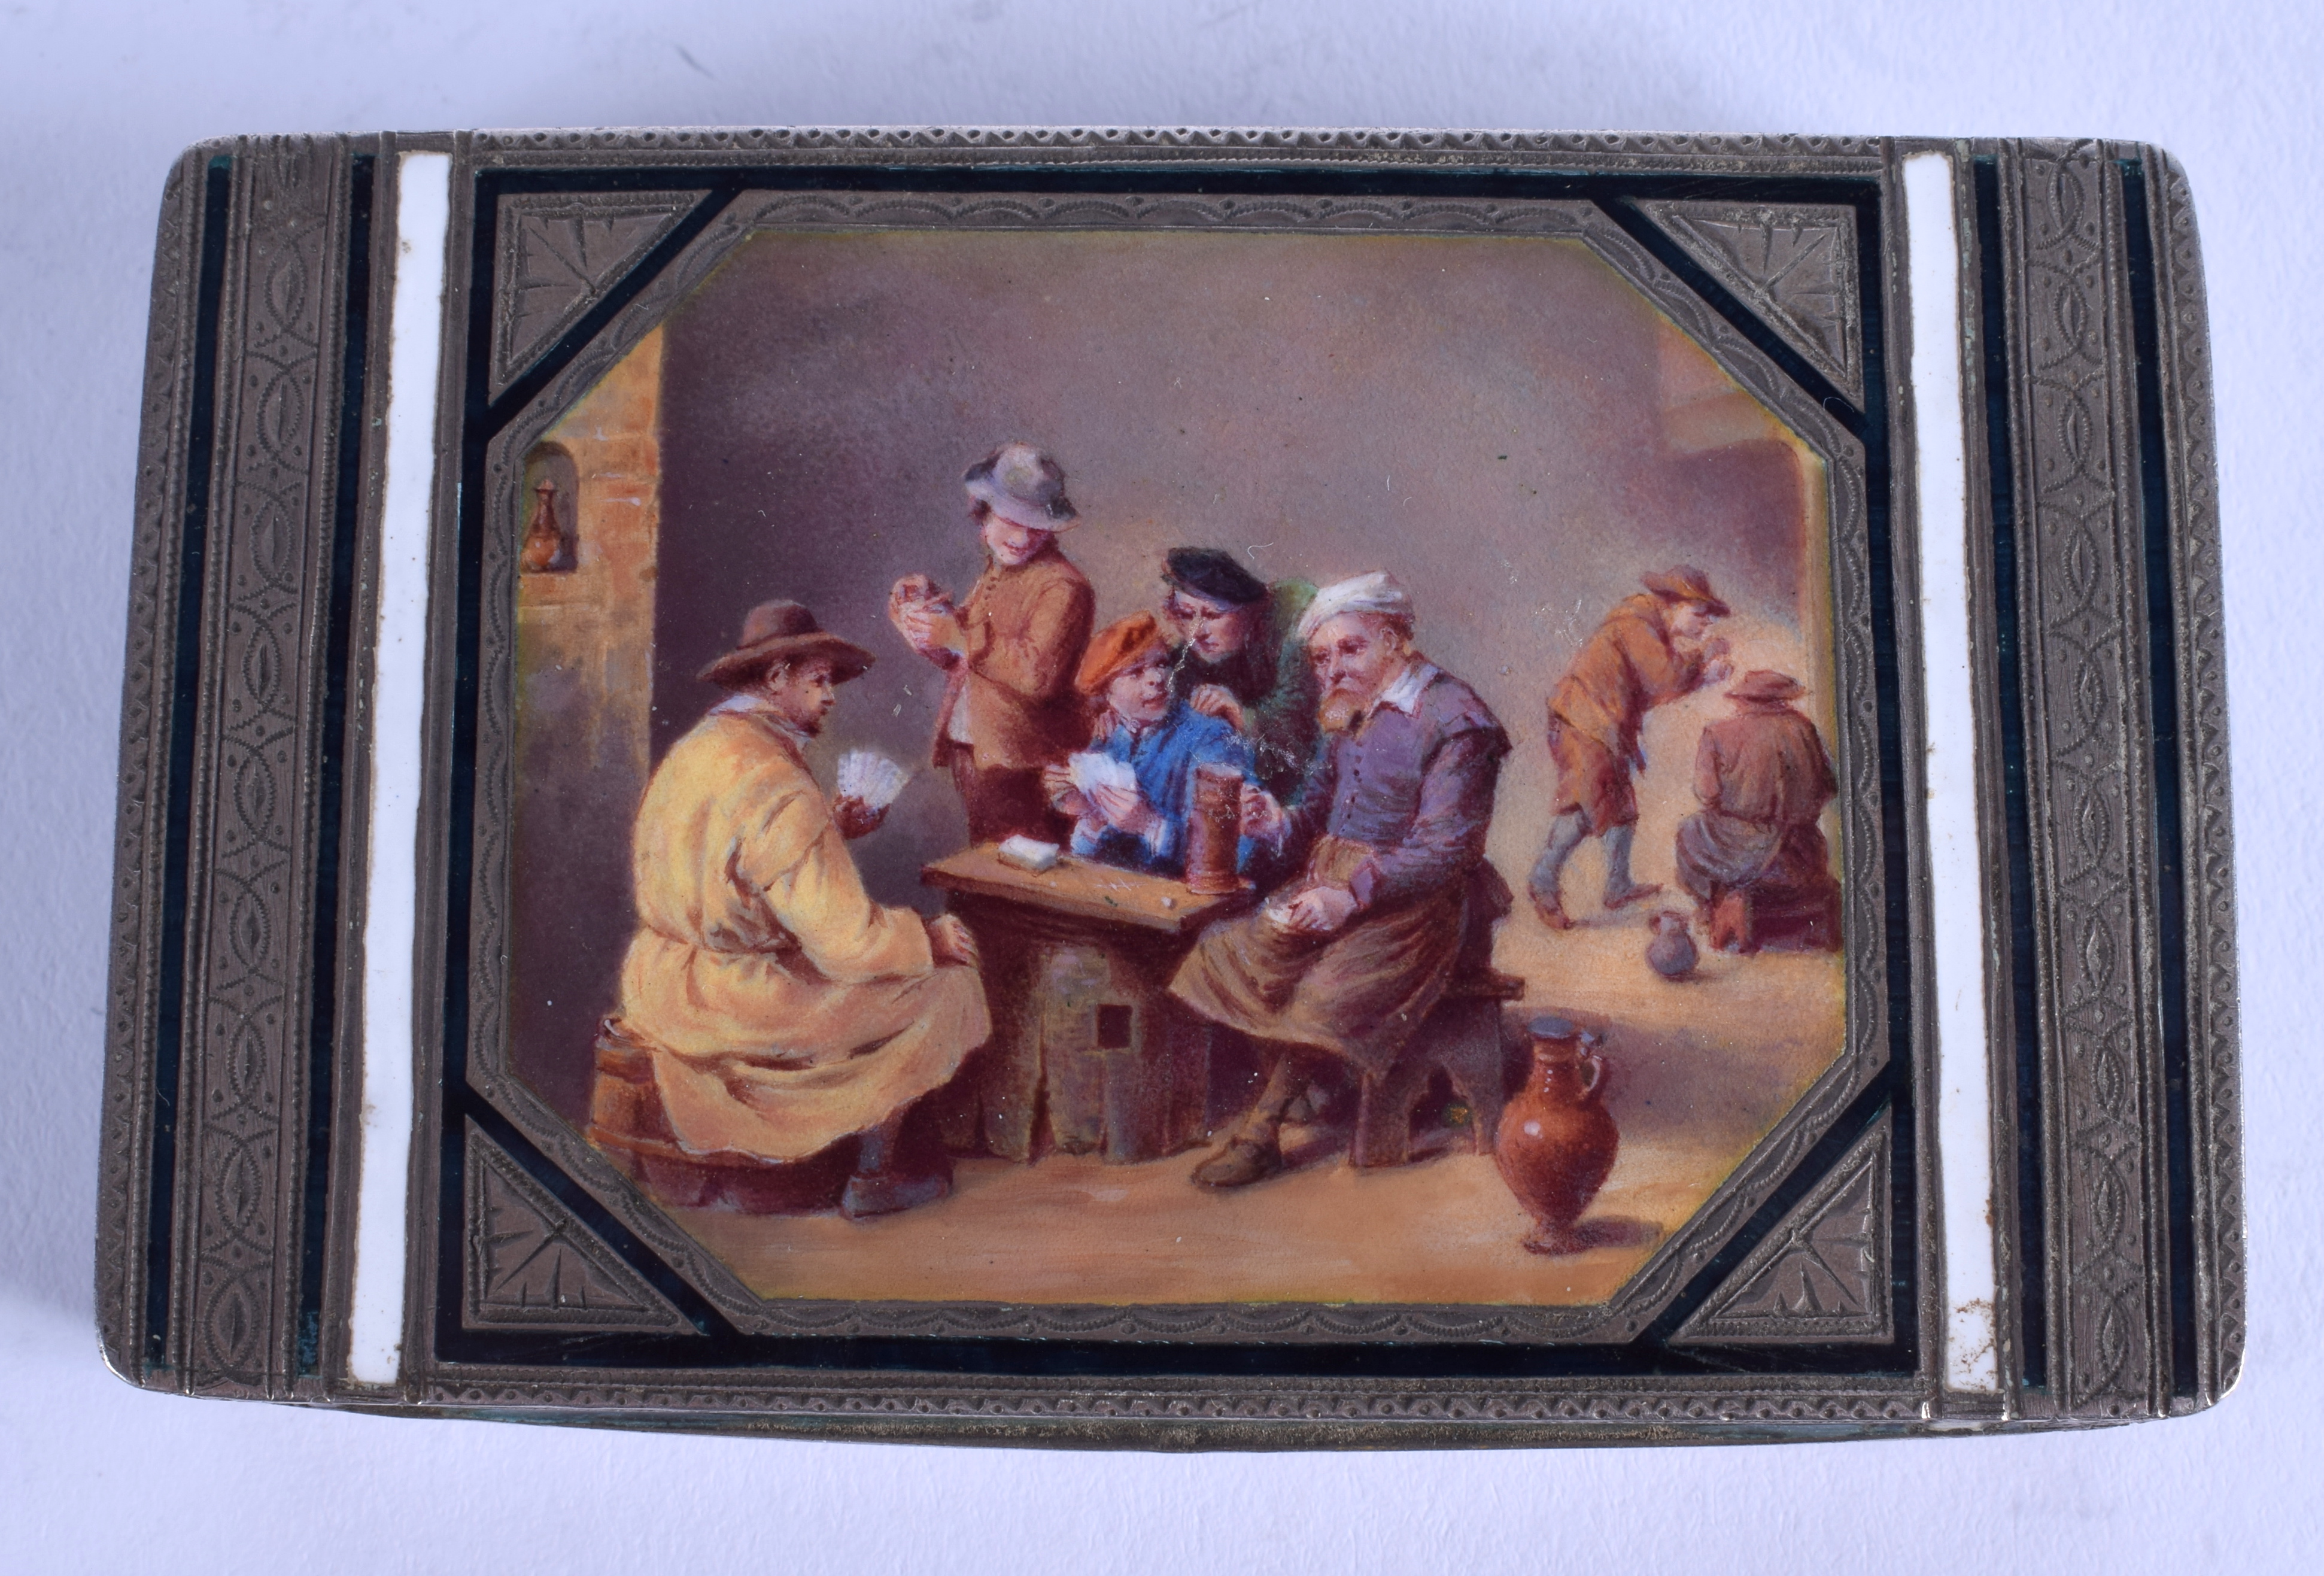 A FINE ANTIQUE SWISS SILVER AND ENAMEL RECTANGULAR SNUFF BOX painted with a tavern scene. 5.1 oz. 8.